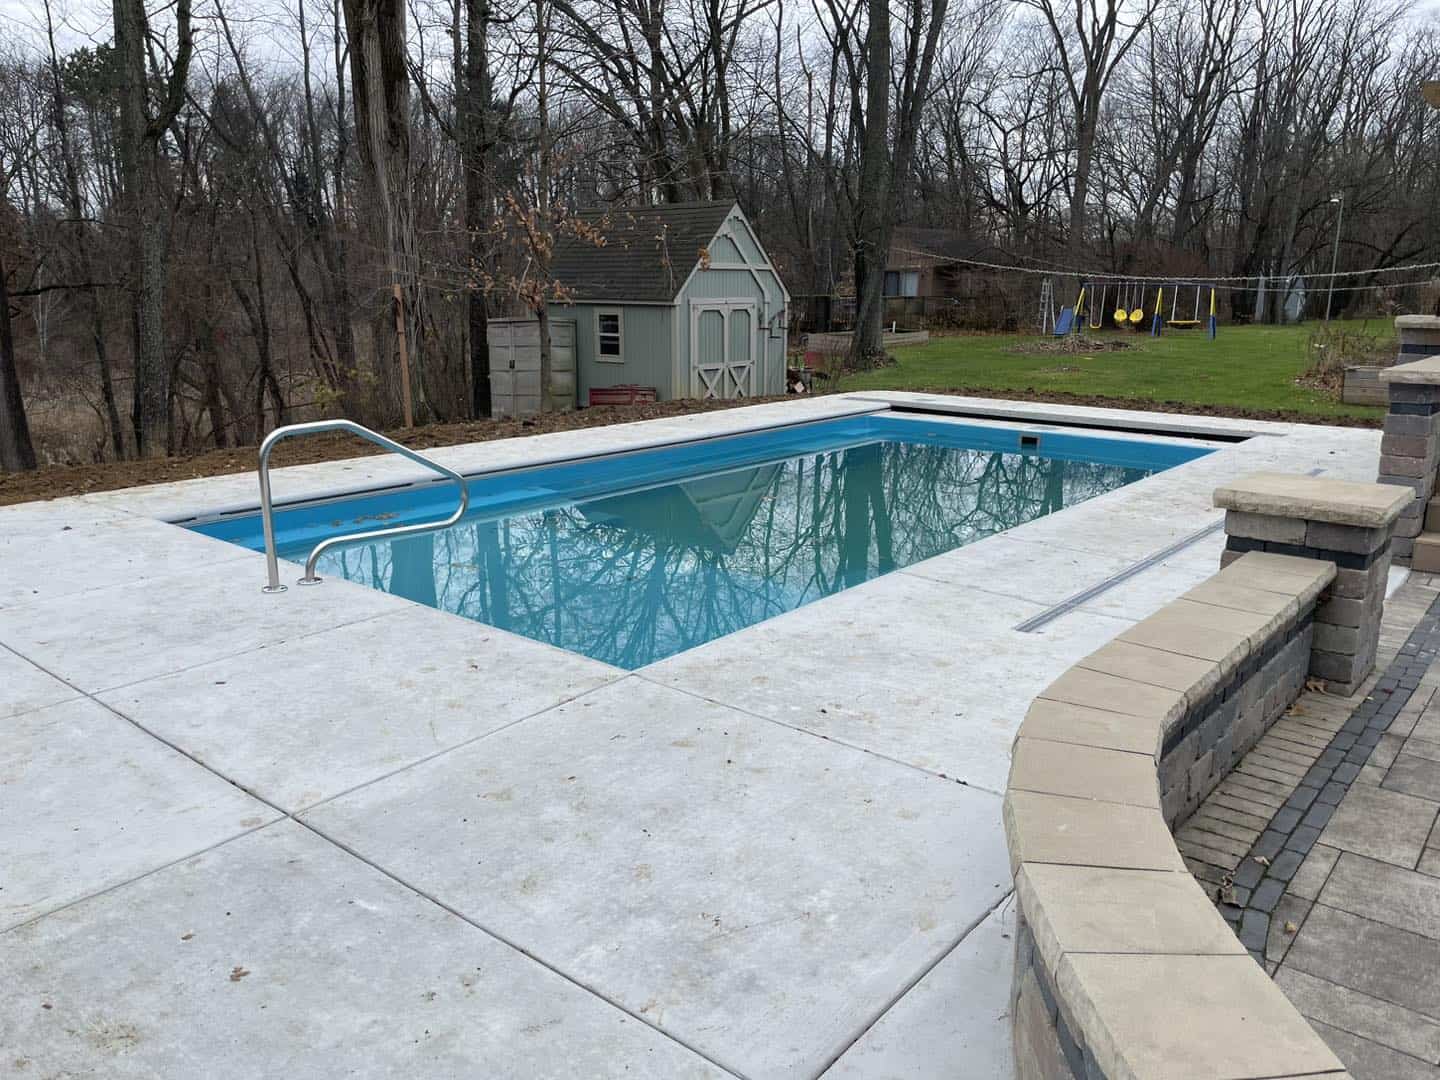 A swimming pool in a backyard with a deck.